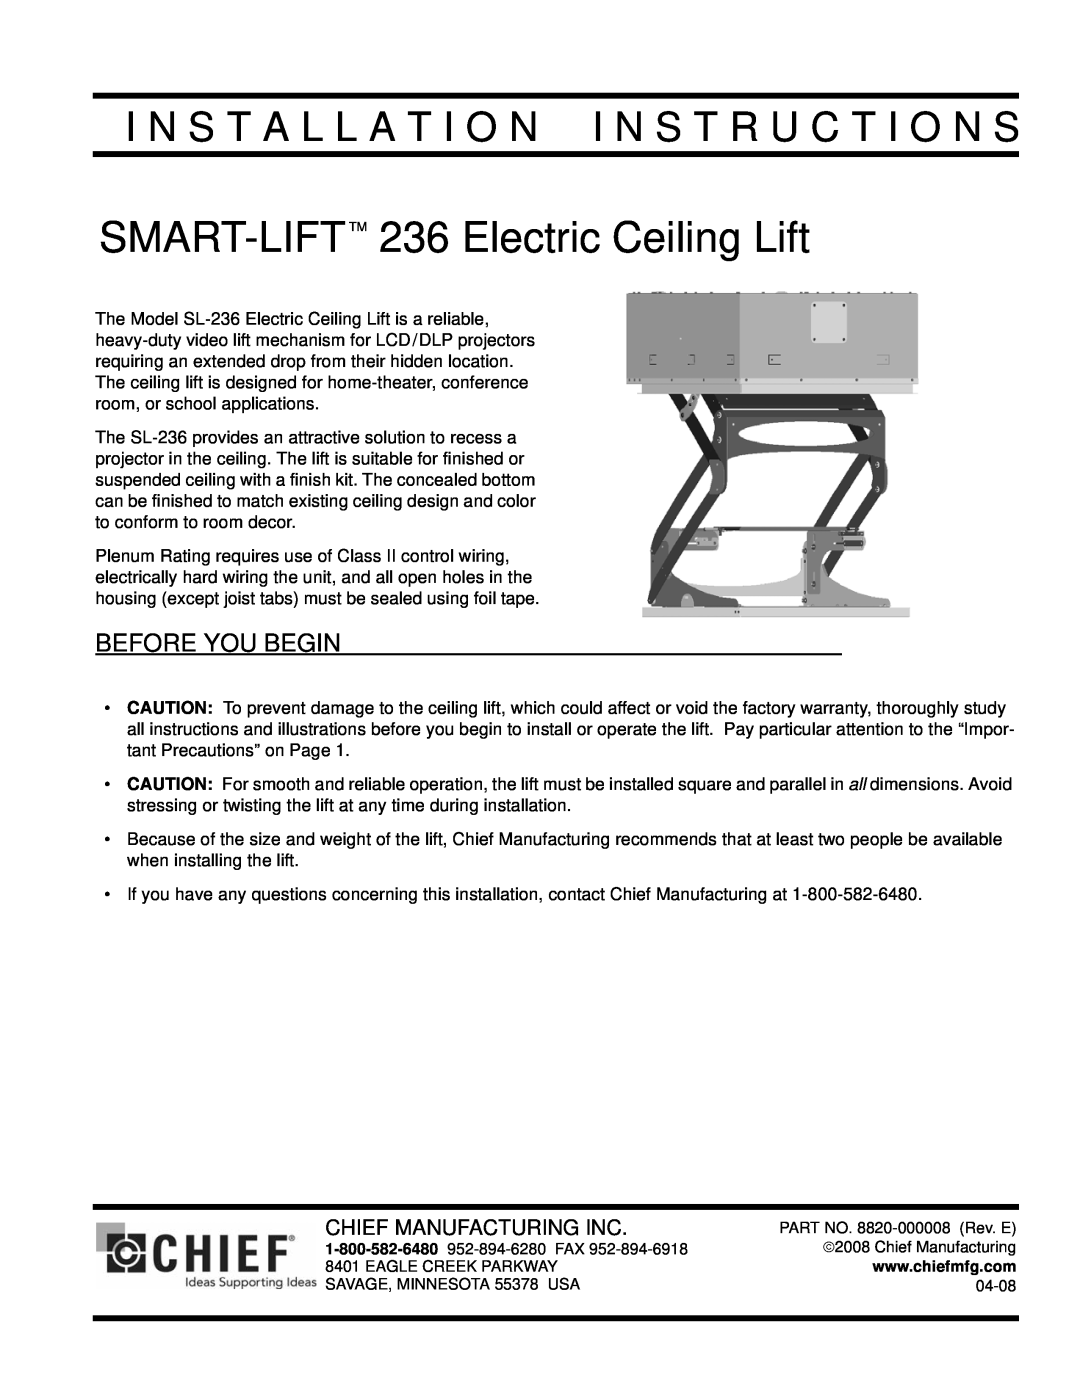 Chief Manufacturing SL-236 installation instructions SMART-LIFTTM 236 Electric Ceiling Lift, Before You Begin 